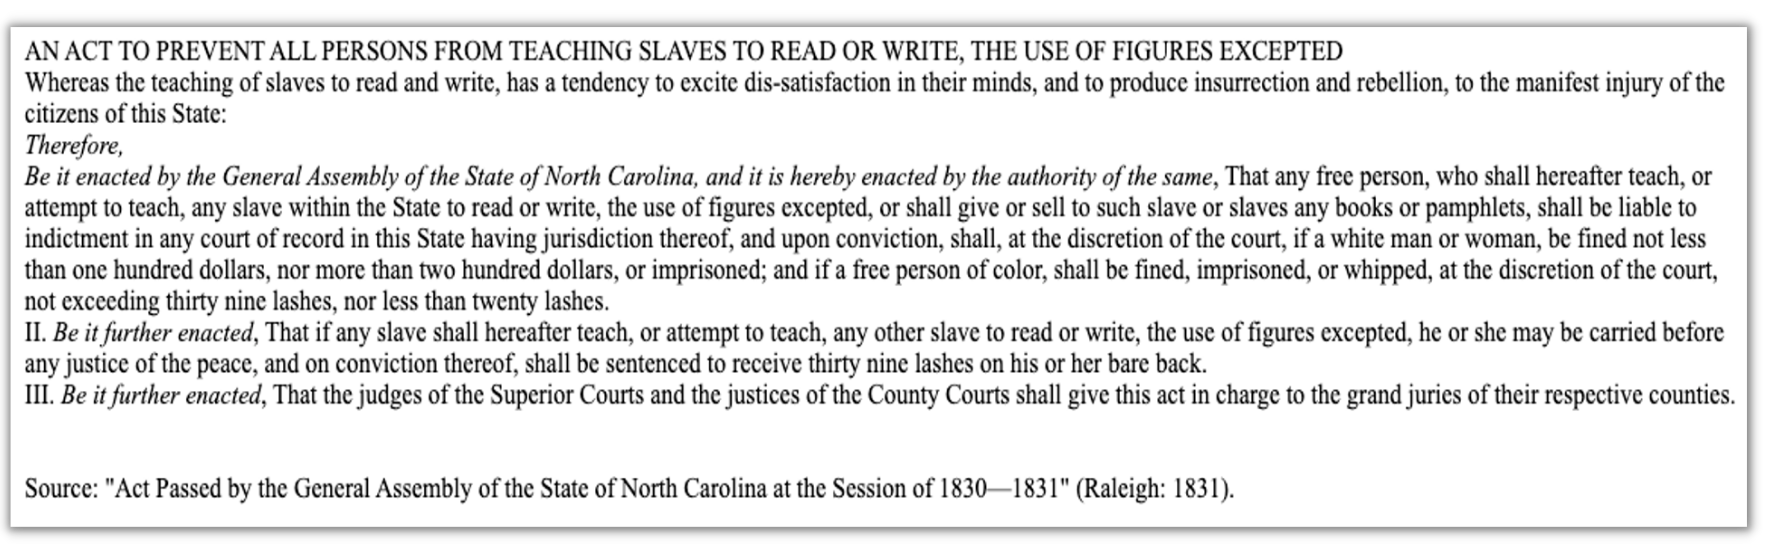 Anti-Literacy Act passed by the General Assembly of North Carolina in 1831. This reminds me of Critical Race Theory laws.